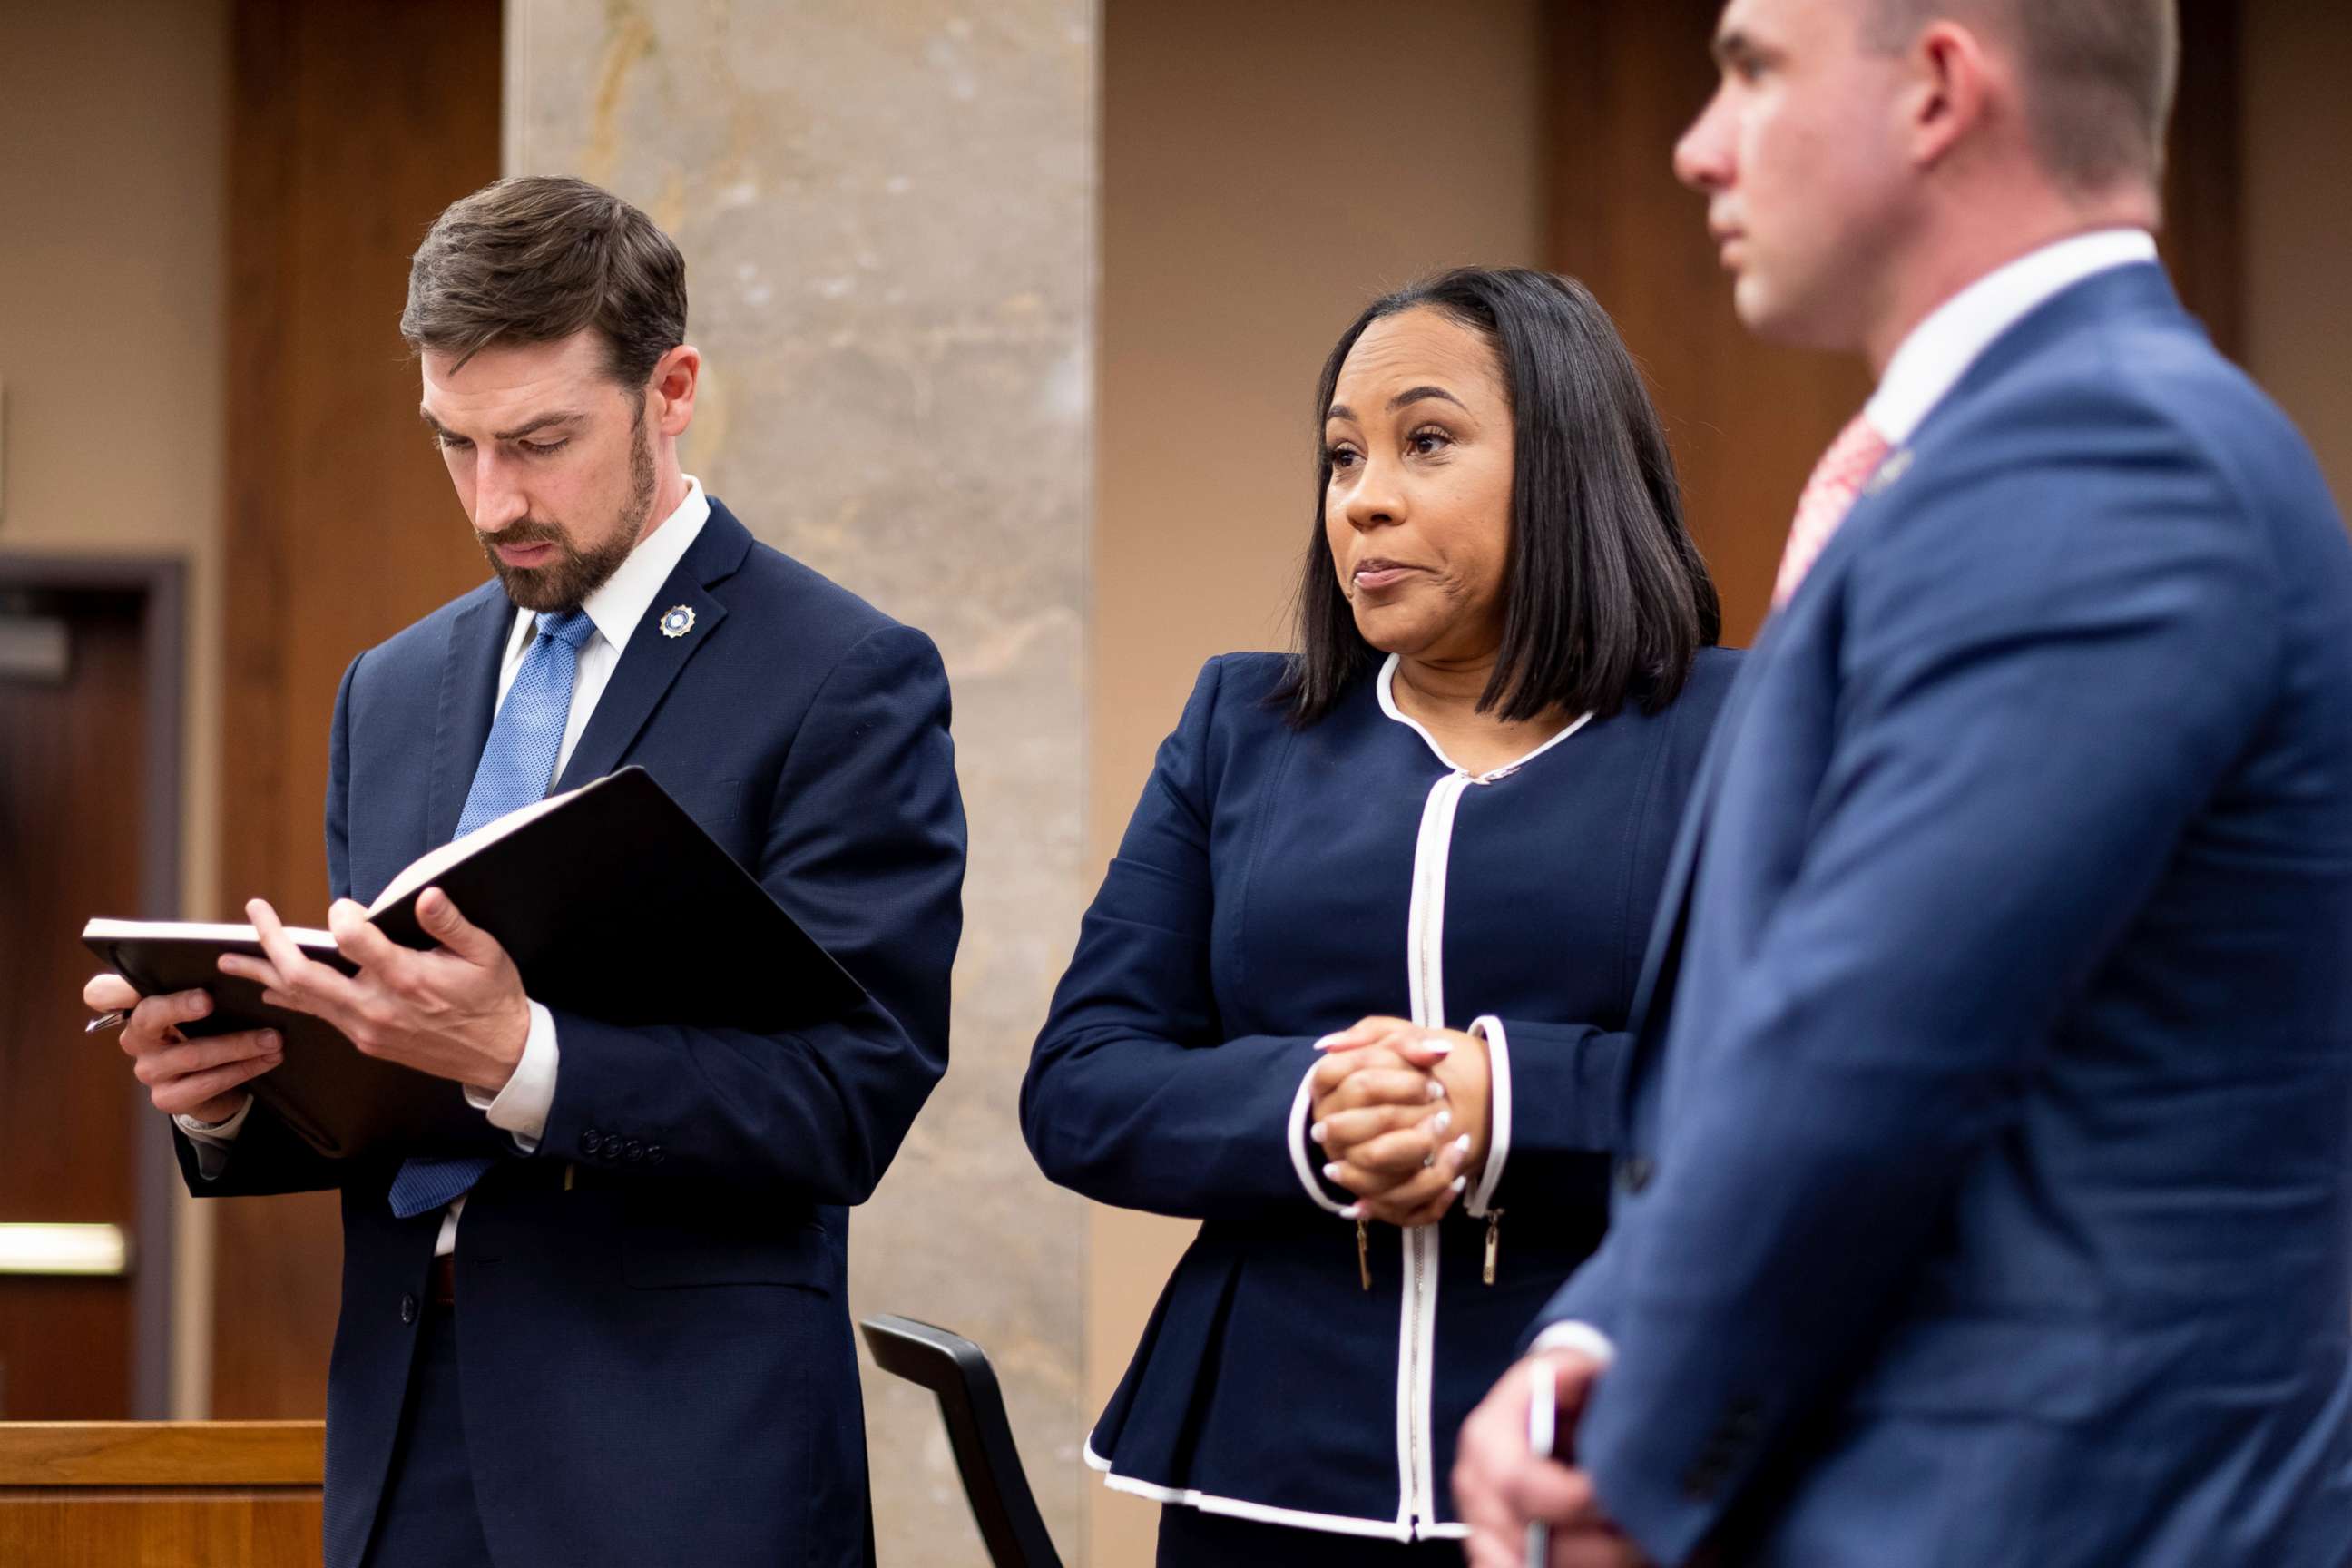 PHOTO: Fulton County District Attorney Fani Willis, center, and members of her team watch as potential jurors are excused during proceedings to seat a special purpose grand jury in Fulton County, Ga., May 2, 2022.